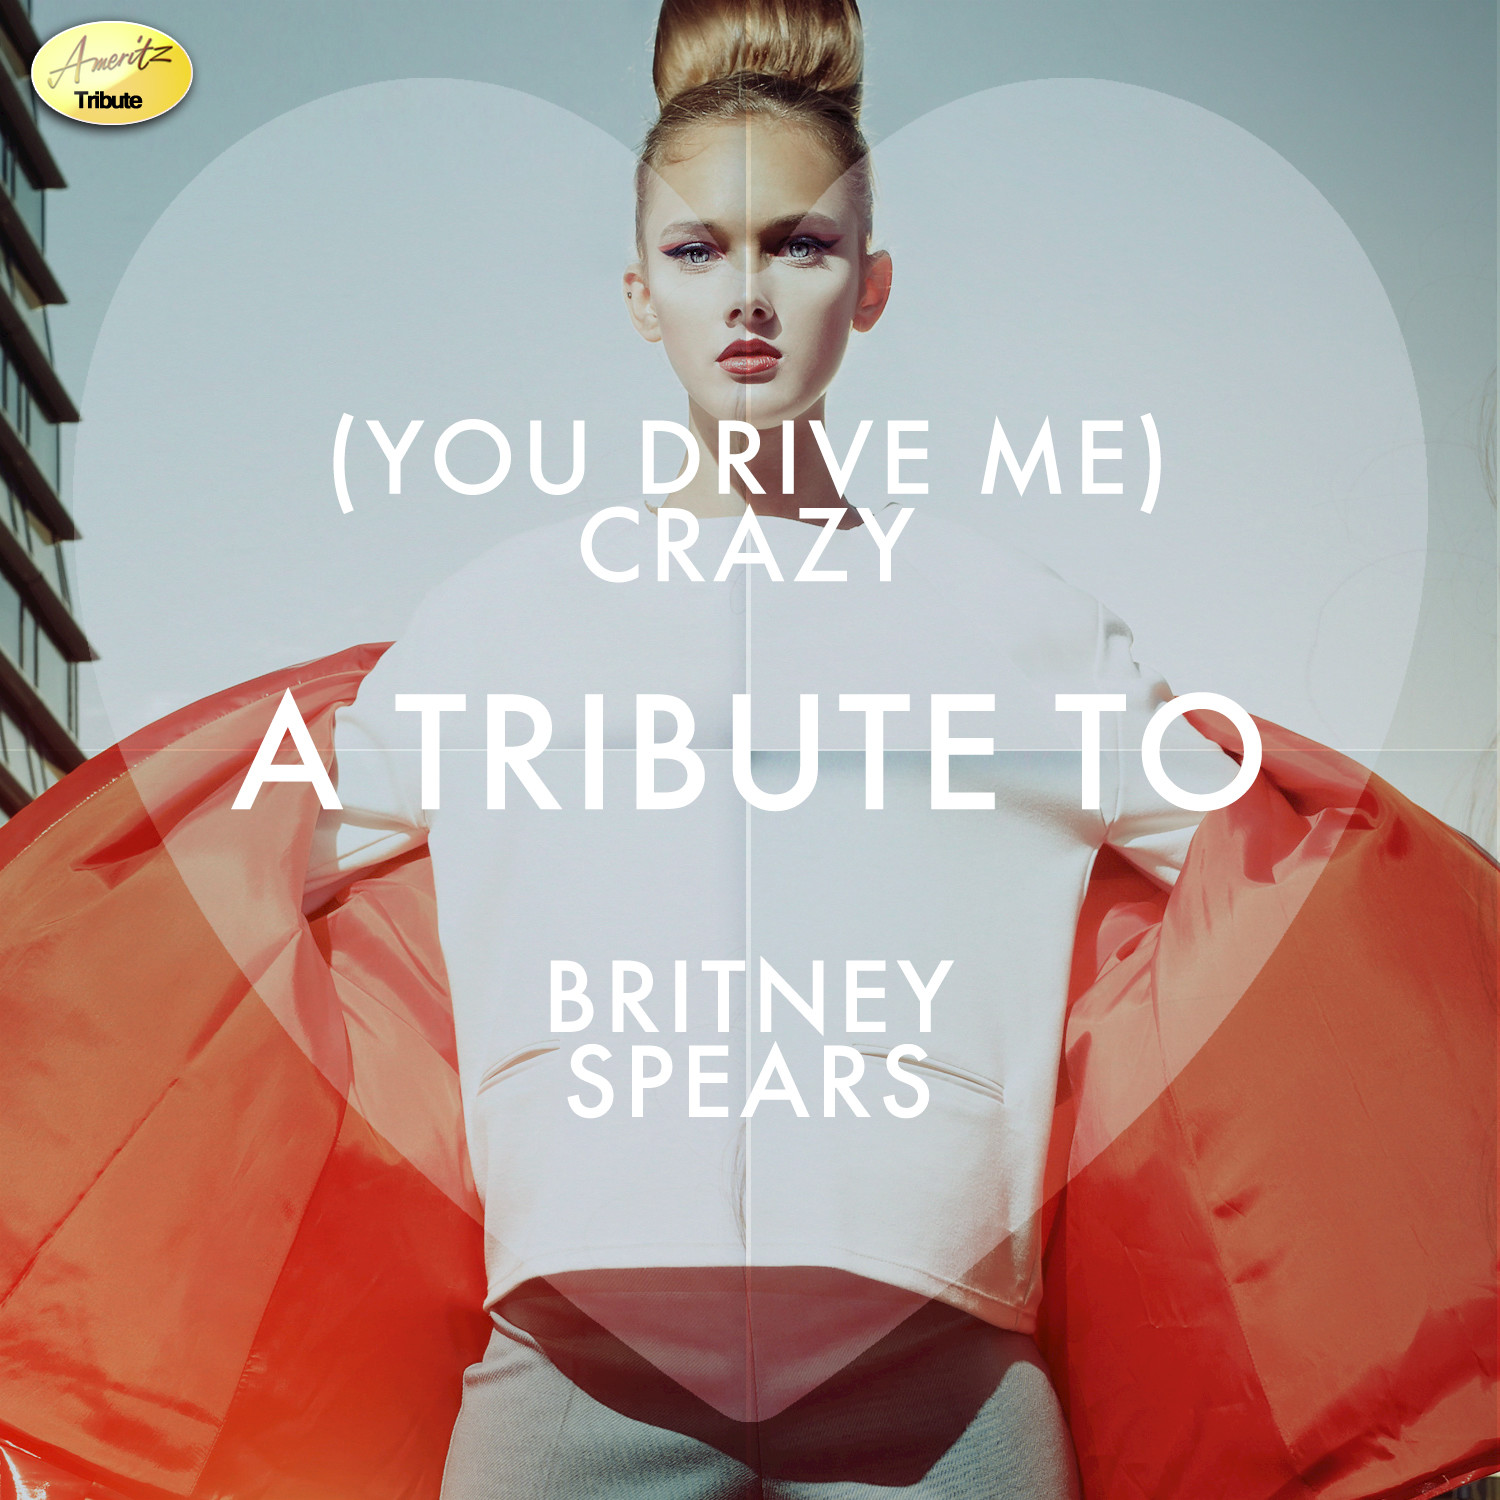 (You Drive Me) Crazy - A Tribute to Britney Spears